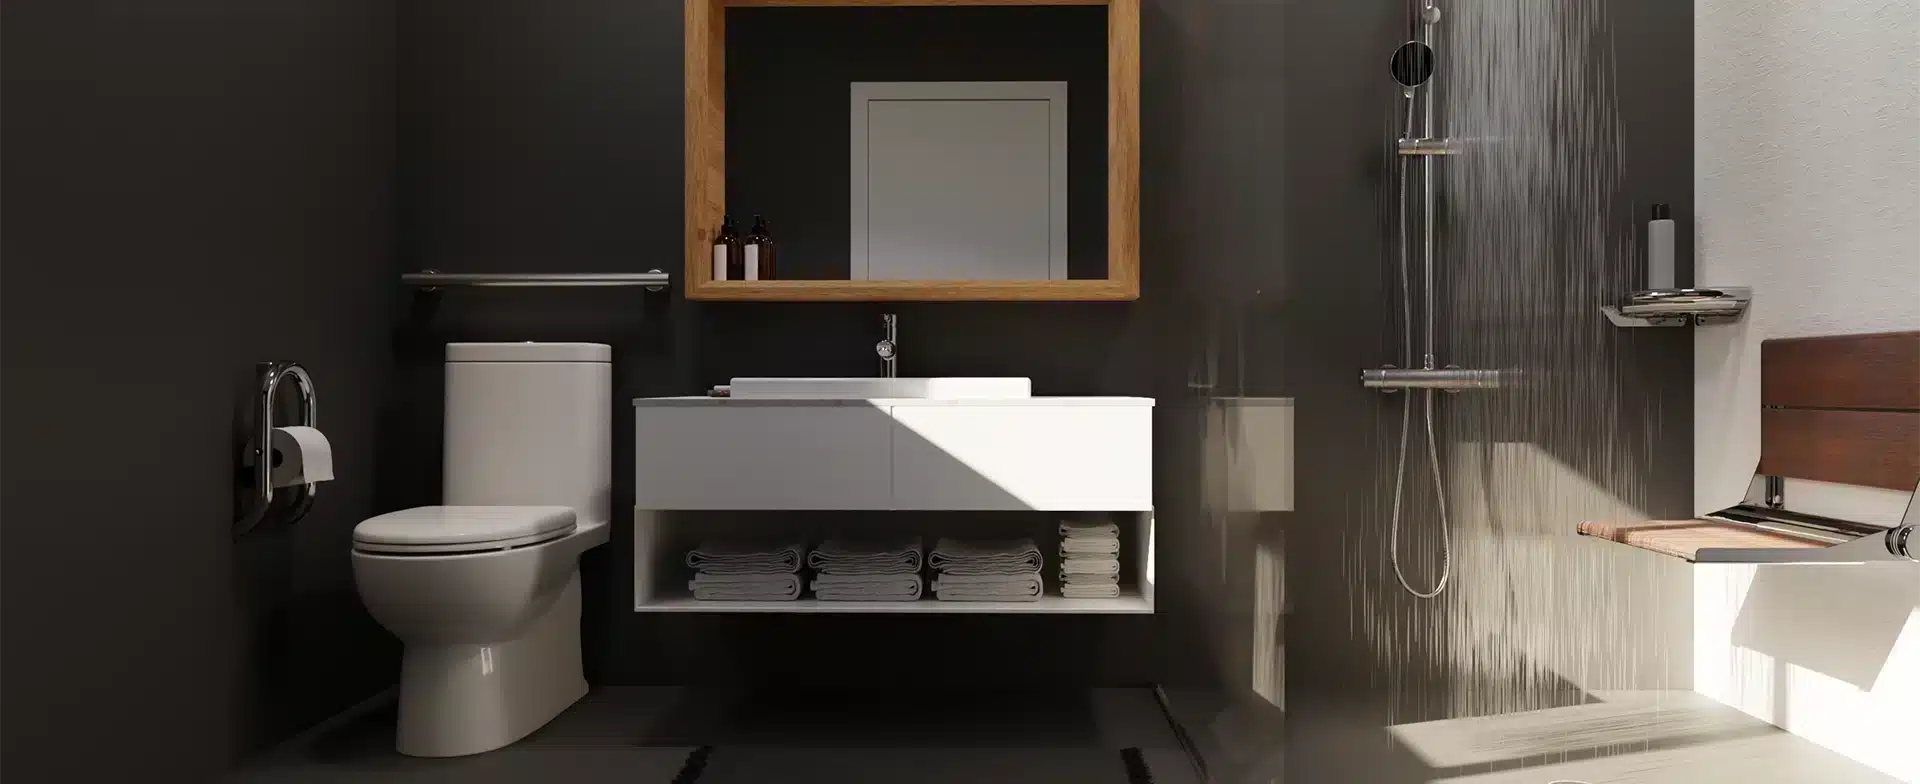 A modern bathroom made accessible with Invisia collection products.